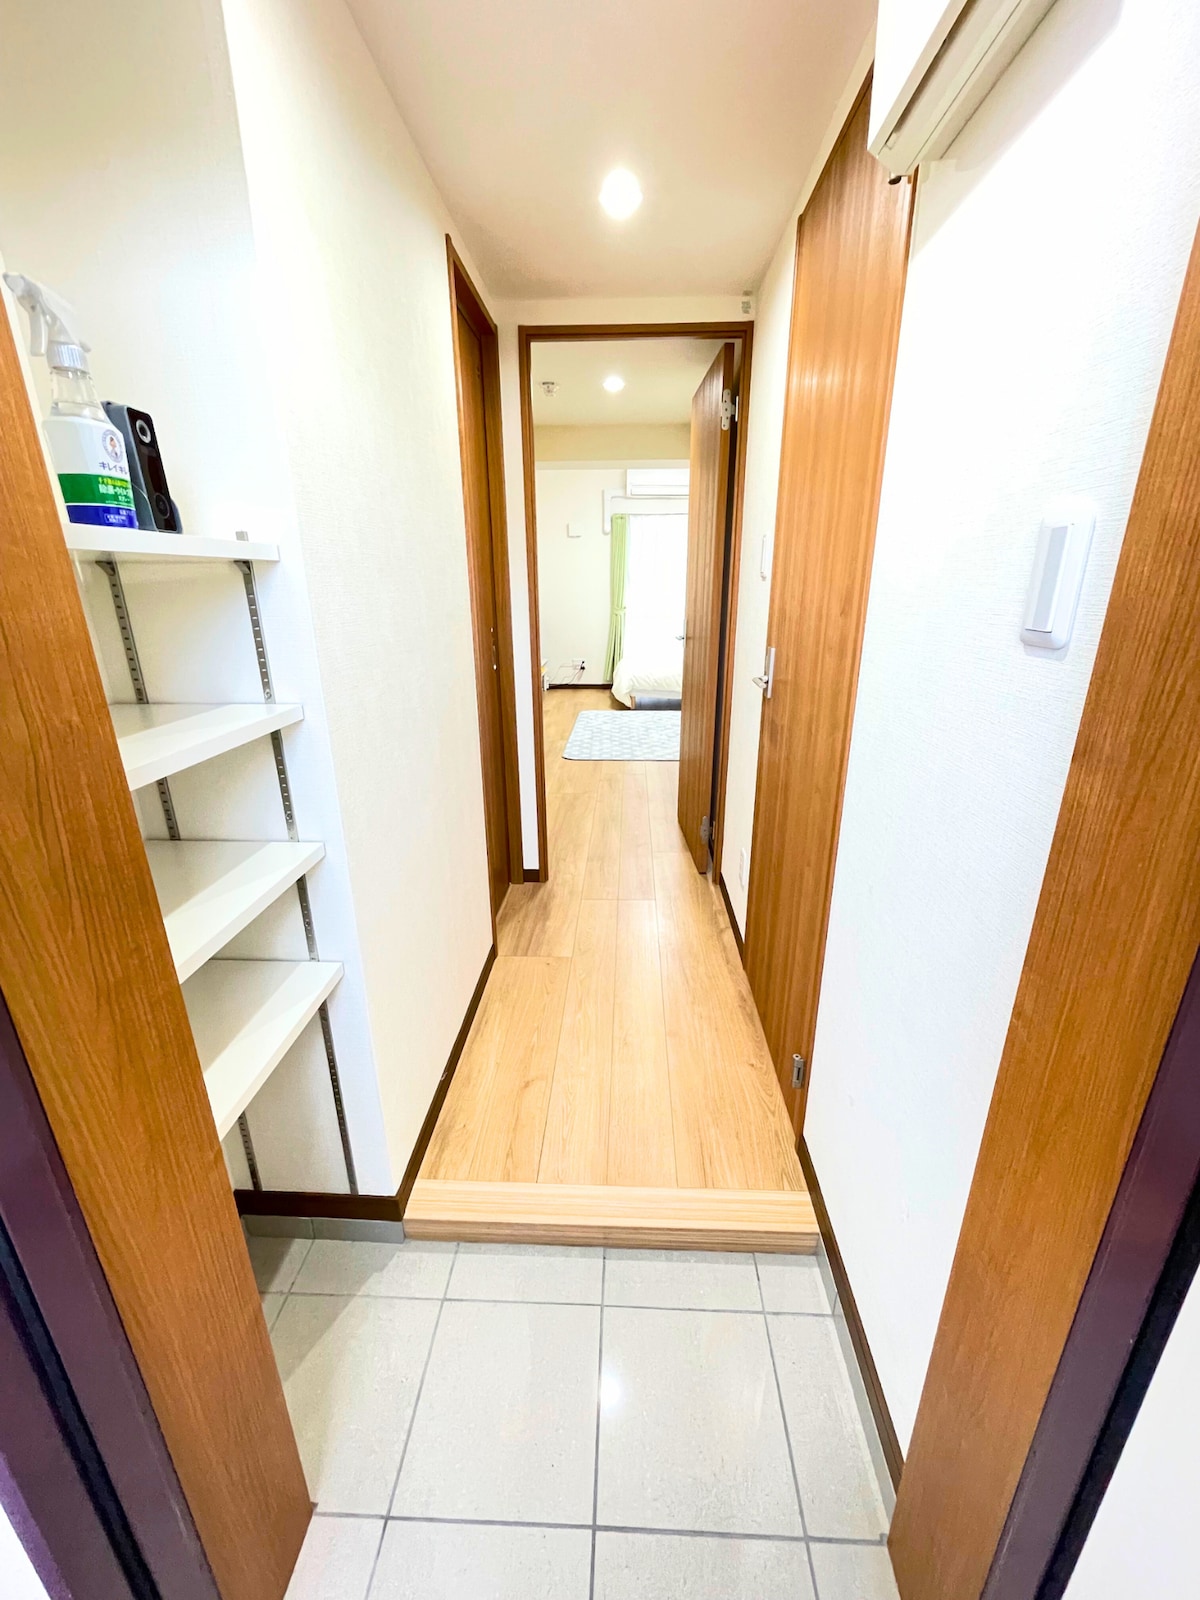 9 minutes walk from Beppu Station! A clean ＆newly